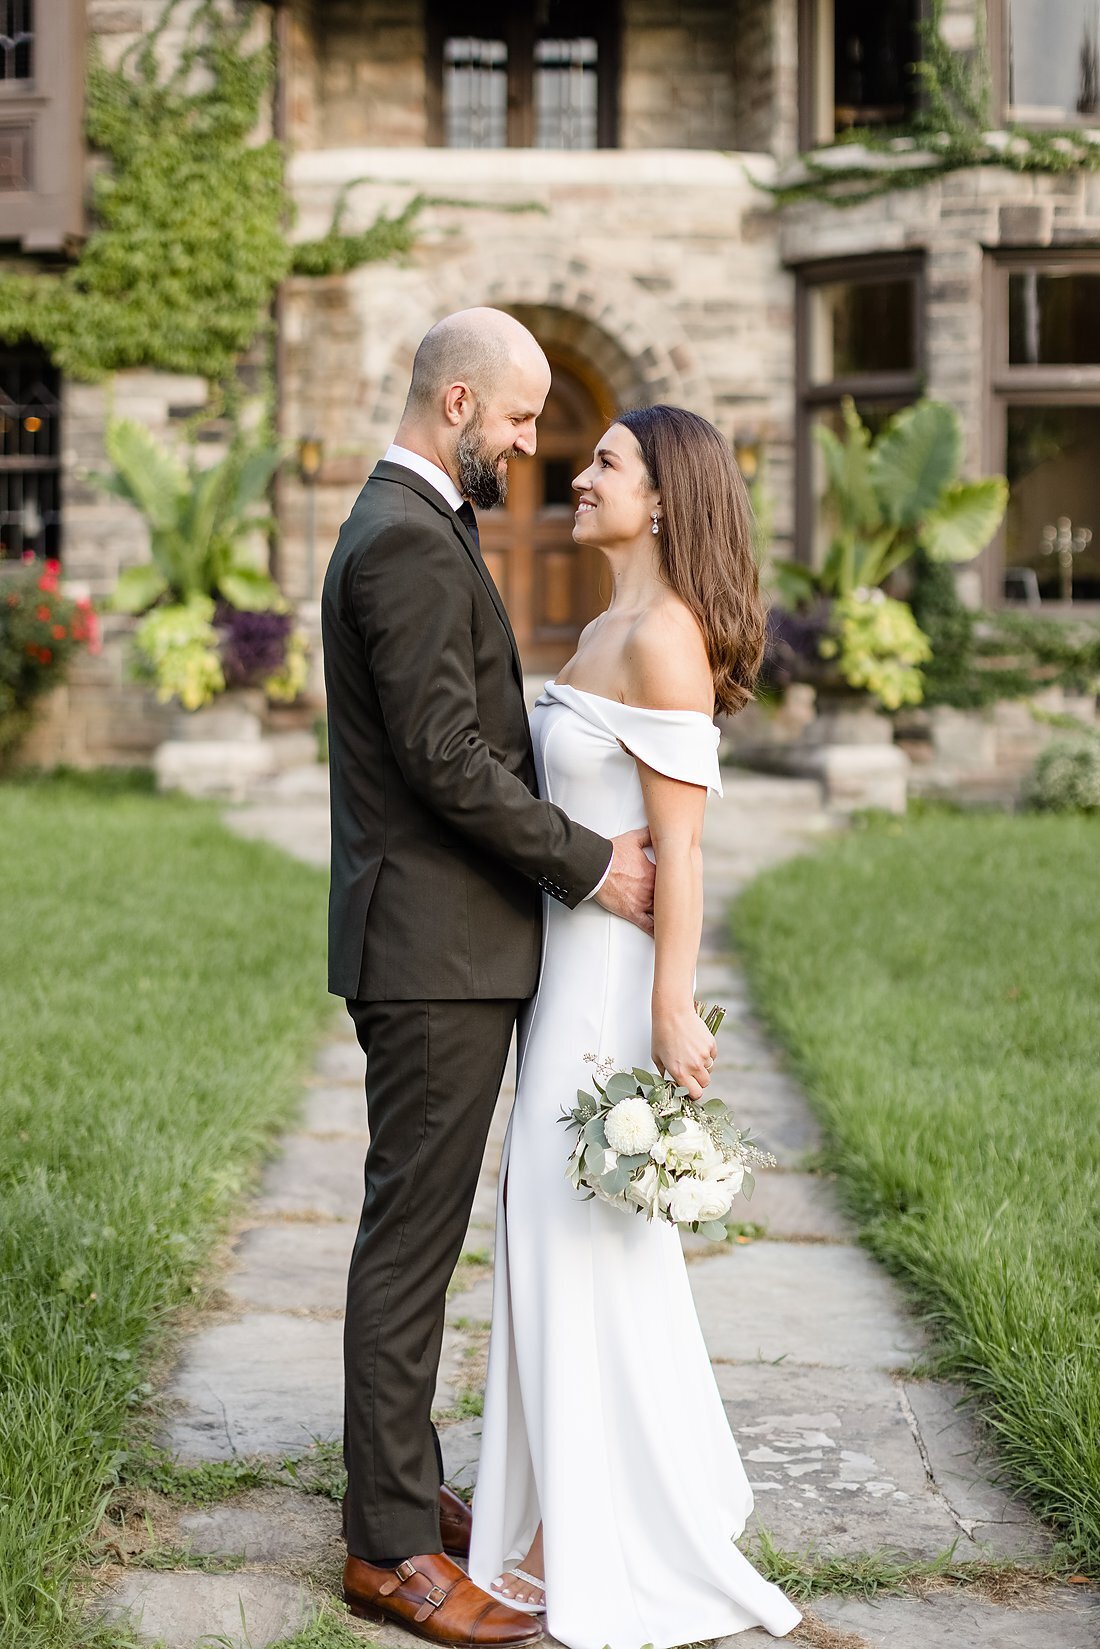 Stylish-groom-embraces-his-stunning-bride-as-they-look-into-each-others-eyes-in-front-of-their-wedding-mansion-in-ontario